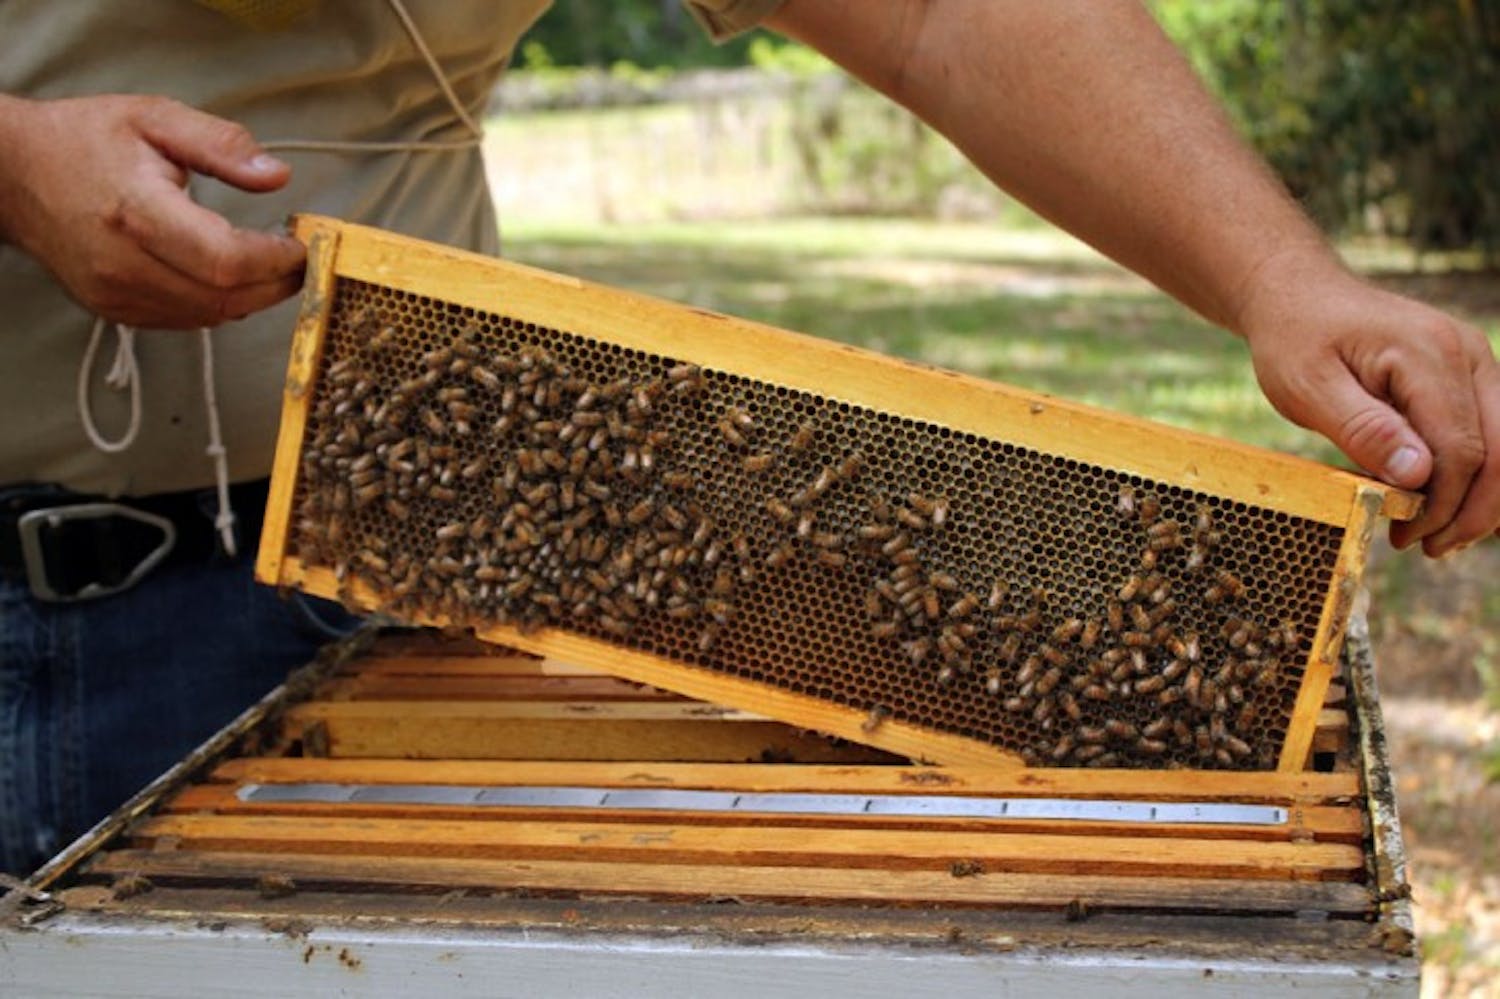 Research technician and apiary manager Mark Dykes lifts a tray from a hive at the UF Bee Biology Research Unit.